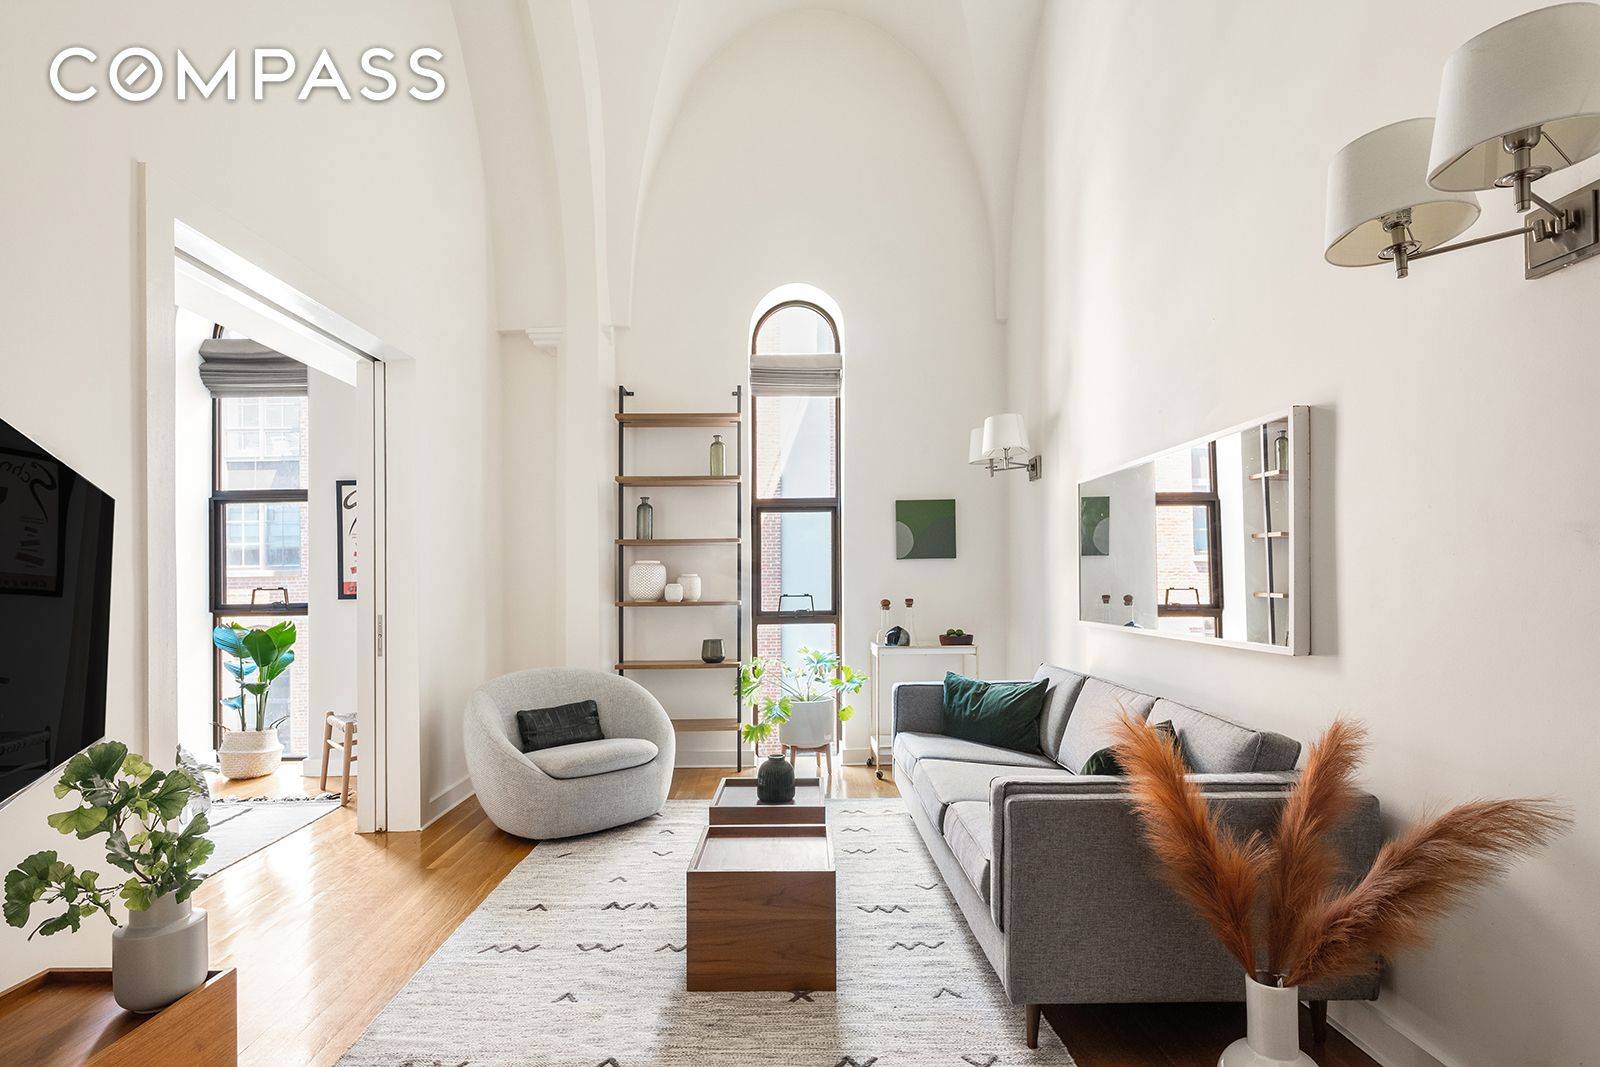 This two bedroom, two bath duplex condo is located in The Arches at Cobble Hill, a luxury landmark condominium on the former site of St.